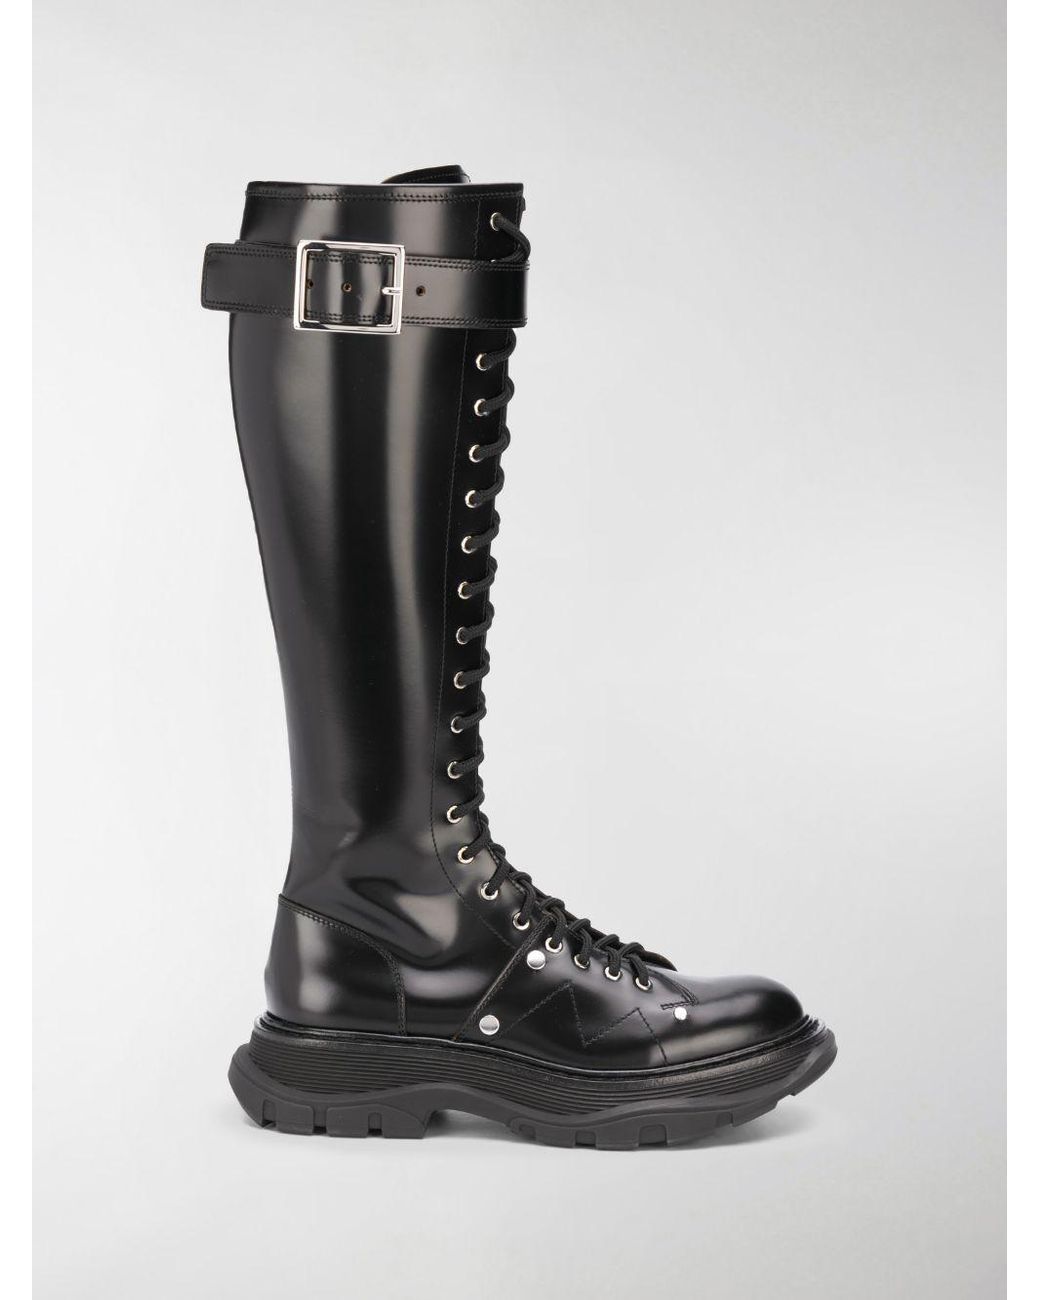 Alexander McQueen Tread Lace-up Leather Boots in Black - Lyst